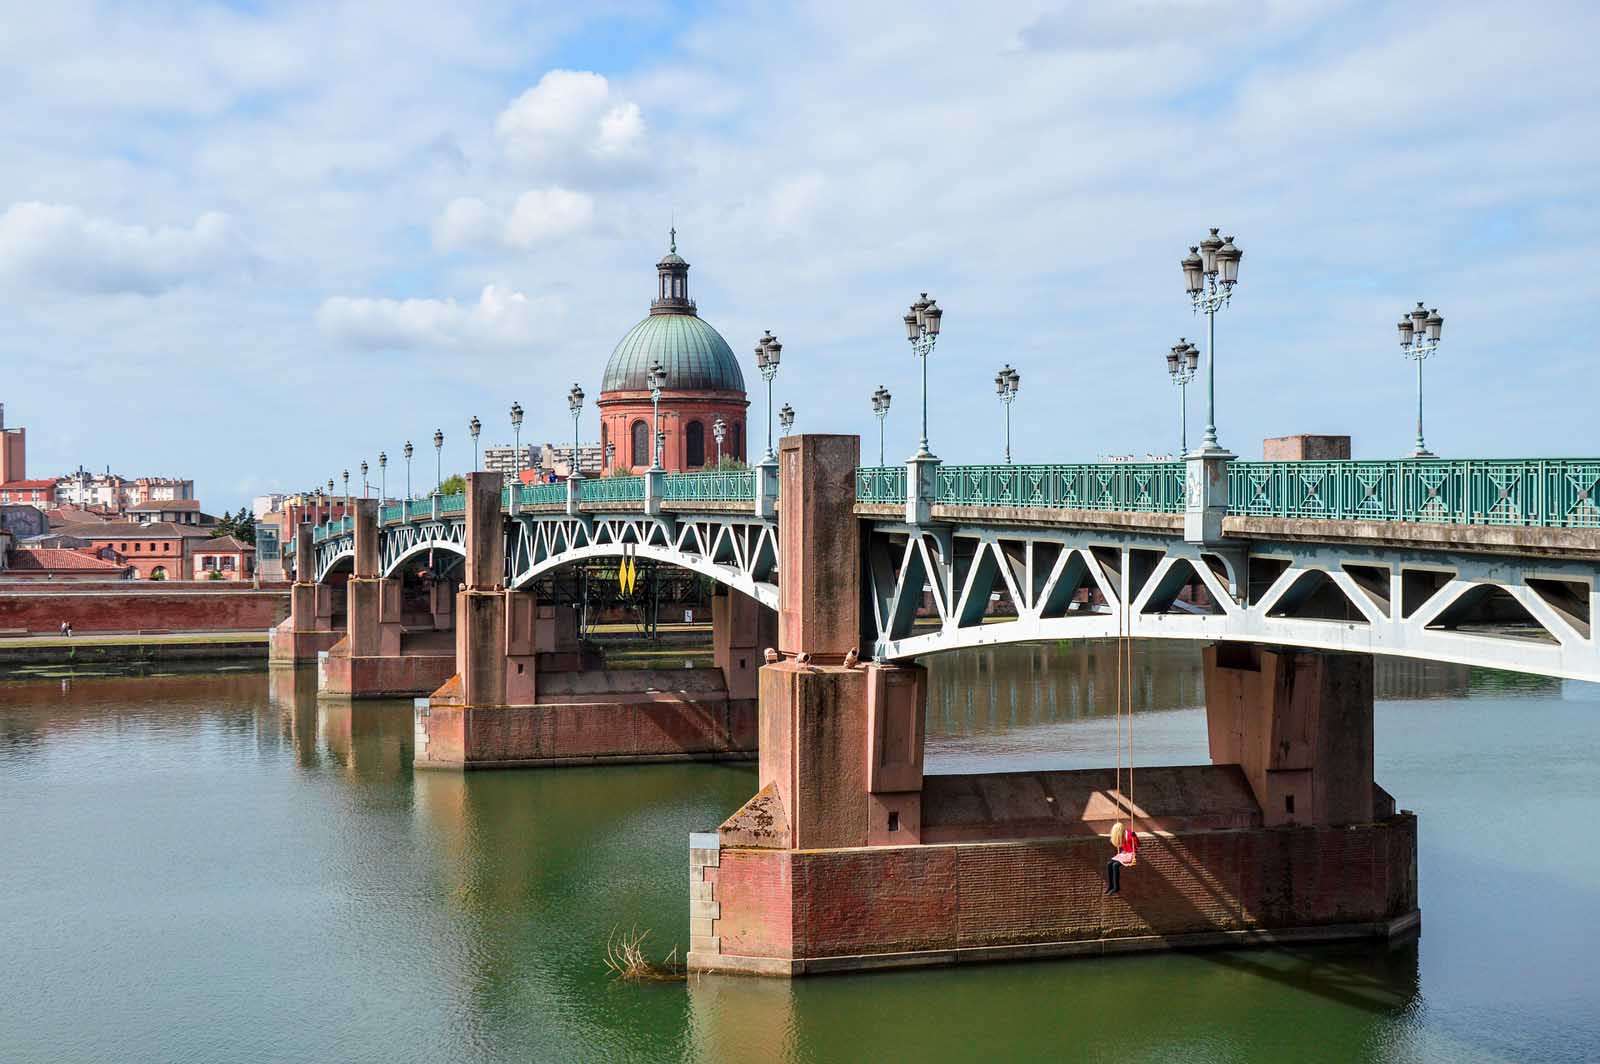 Toulouse in southwest France